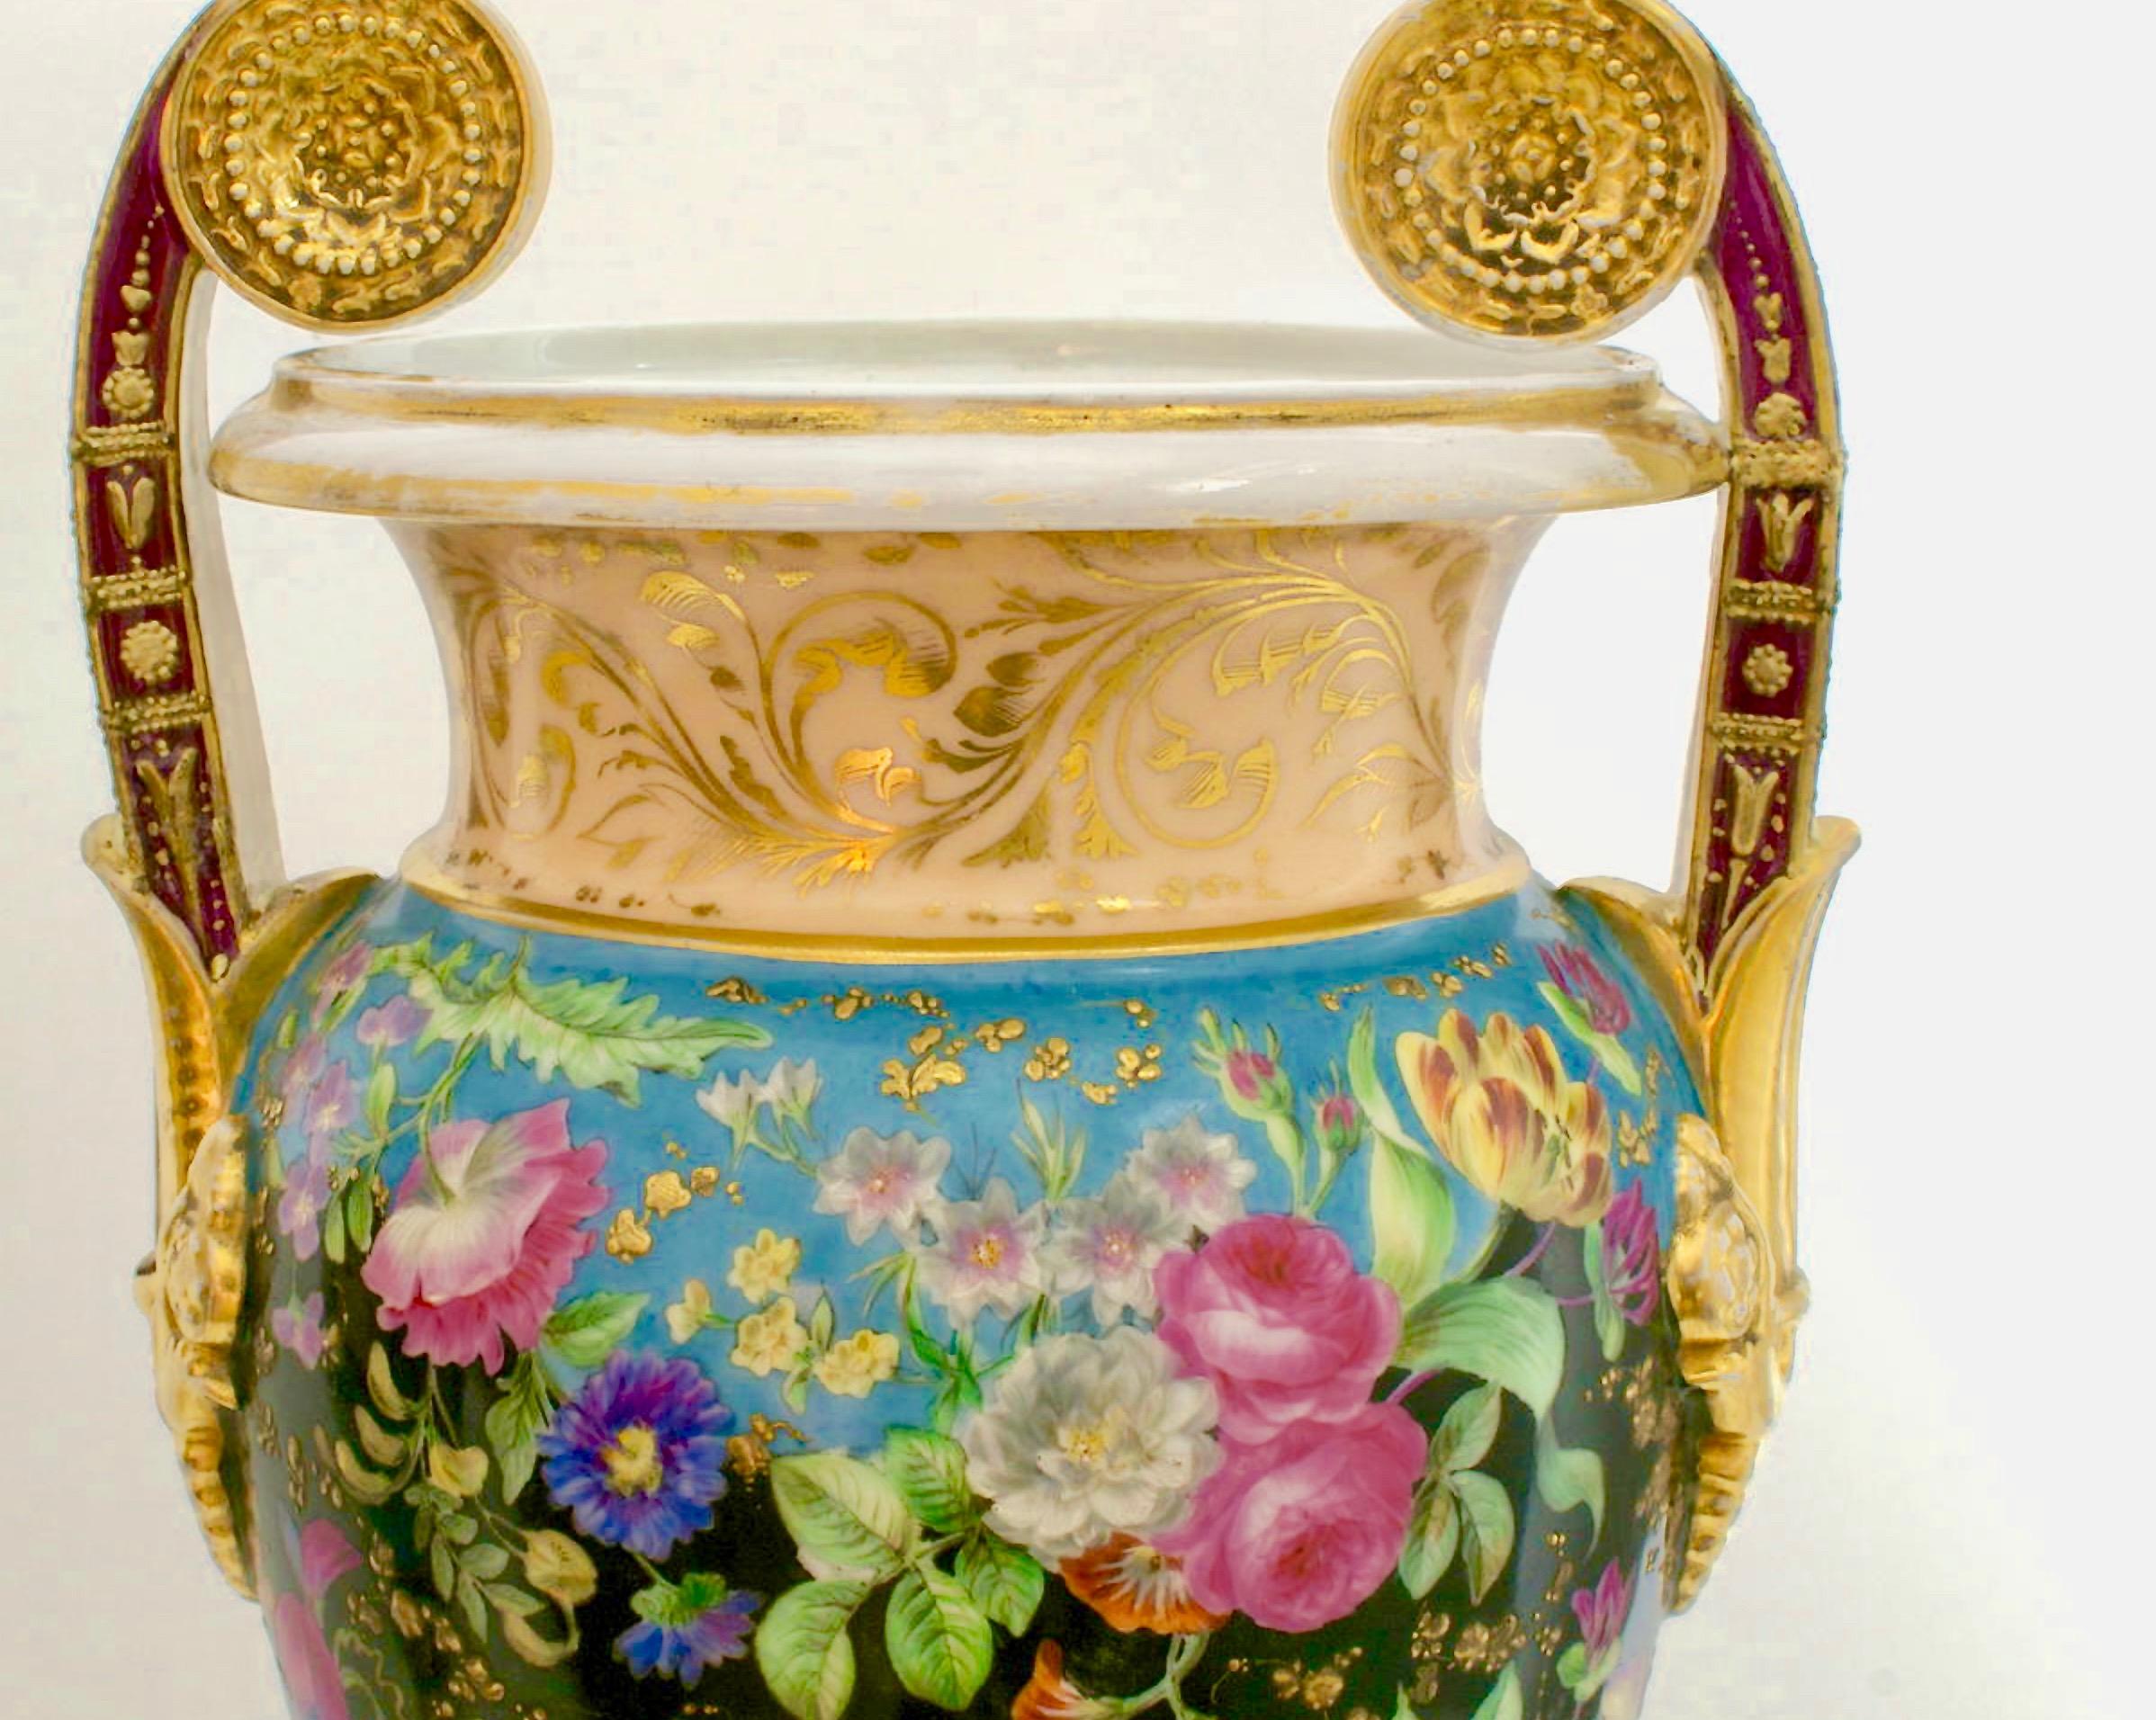 A pair of porcelain urns from the empire period, probably Russian. Painted with flowers and gilded.